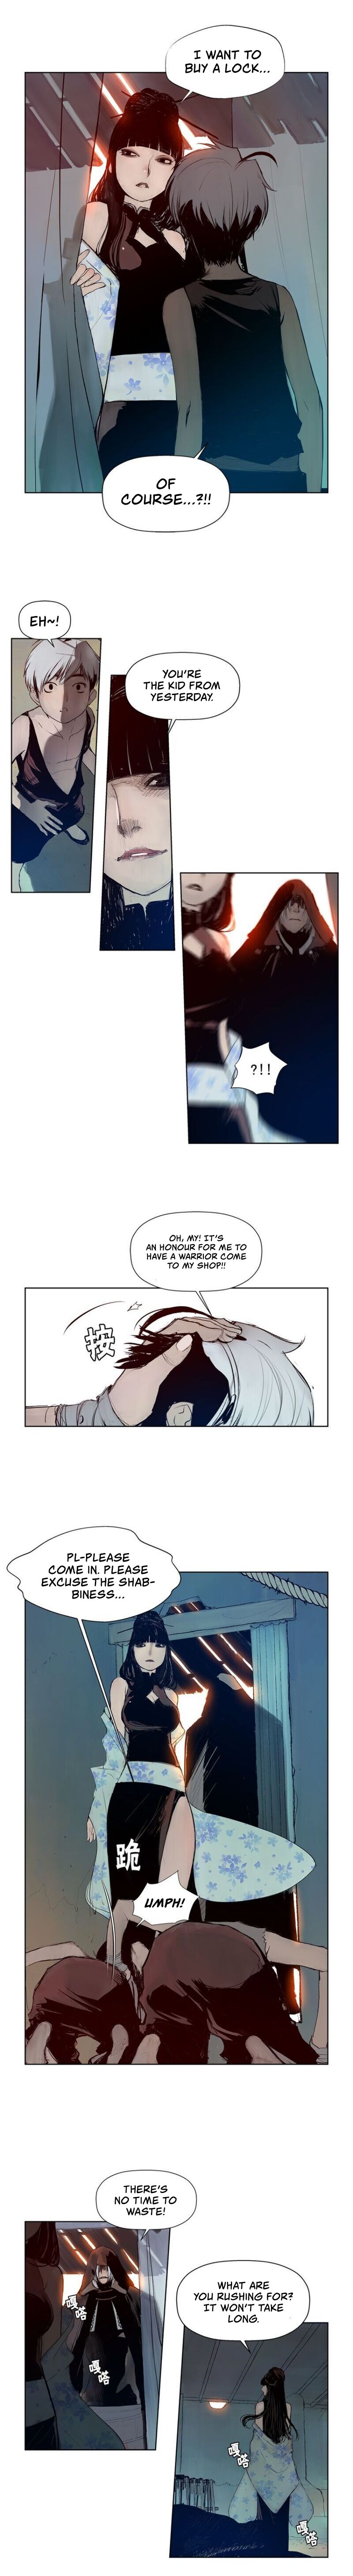 The Sword Of Glory - Page 2